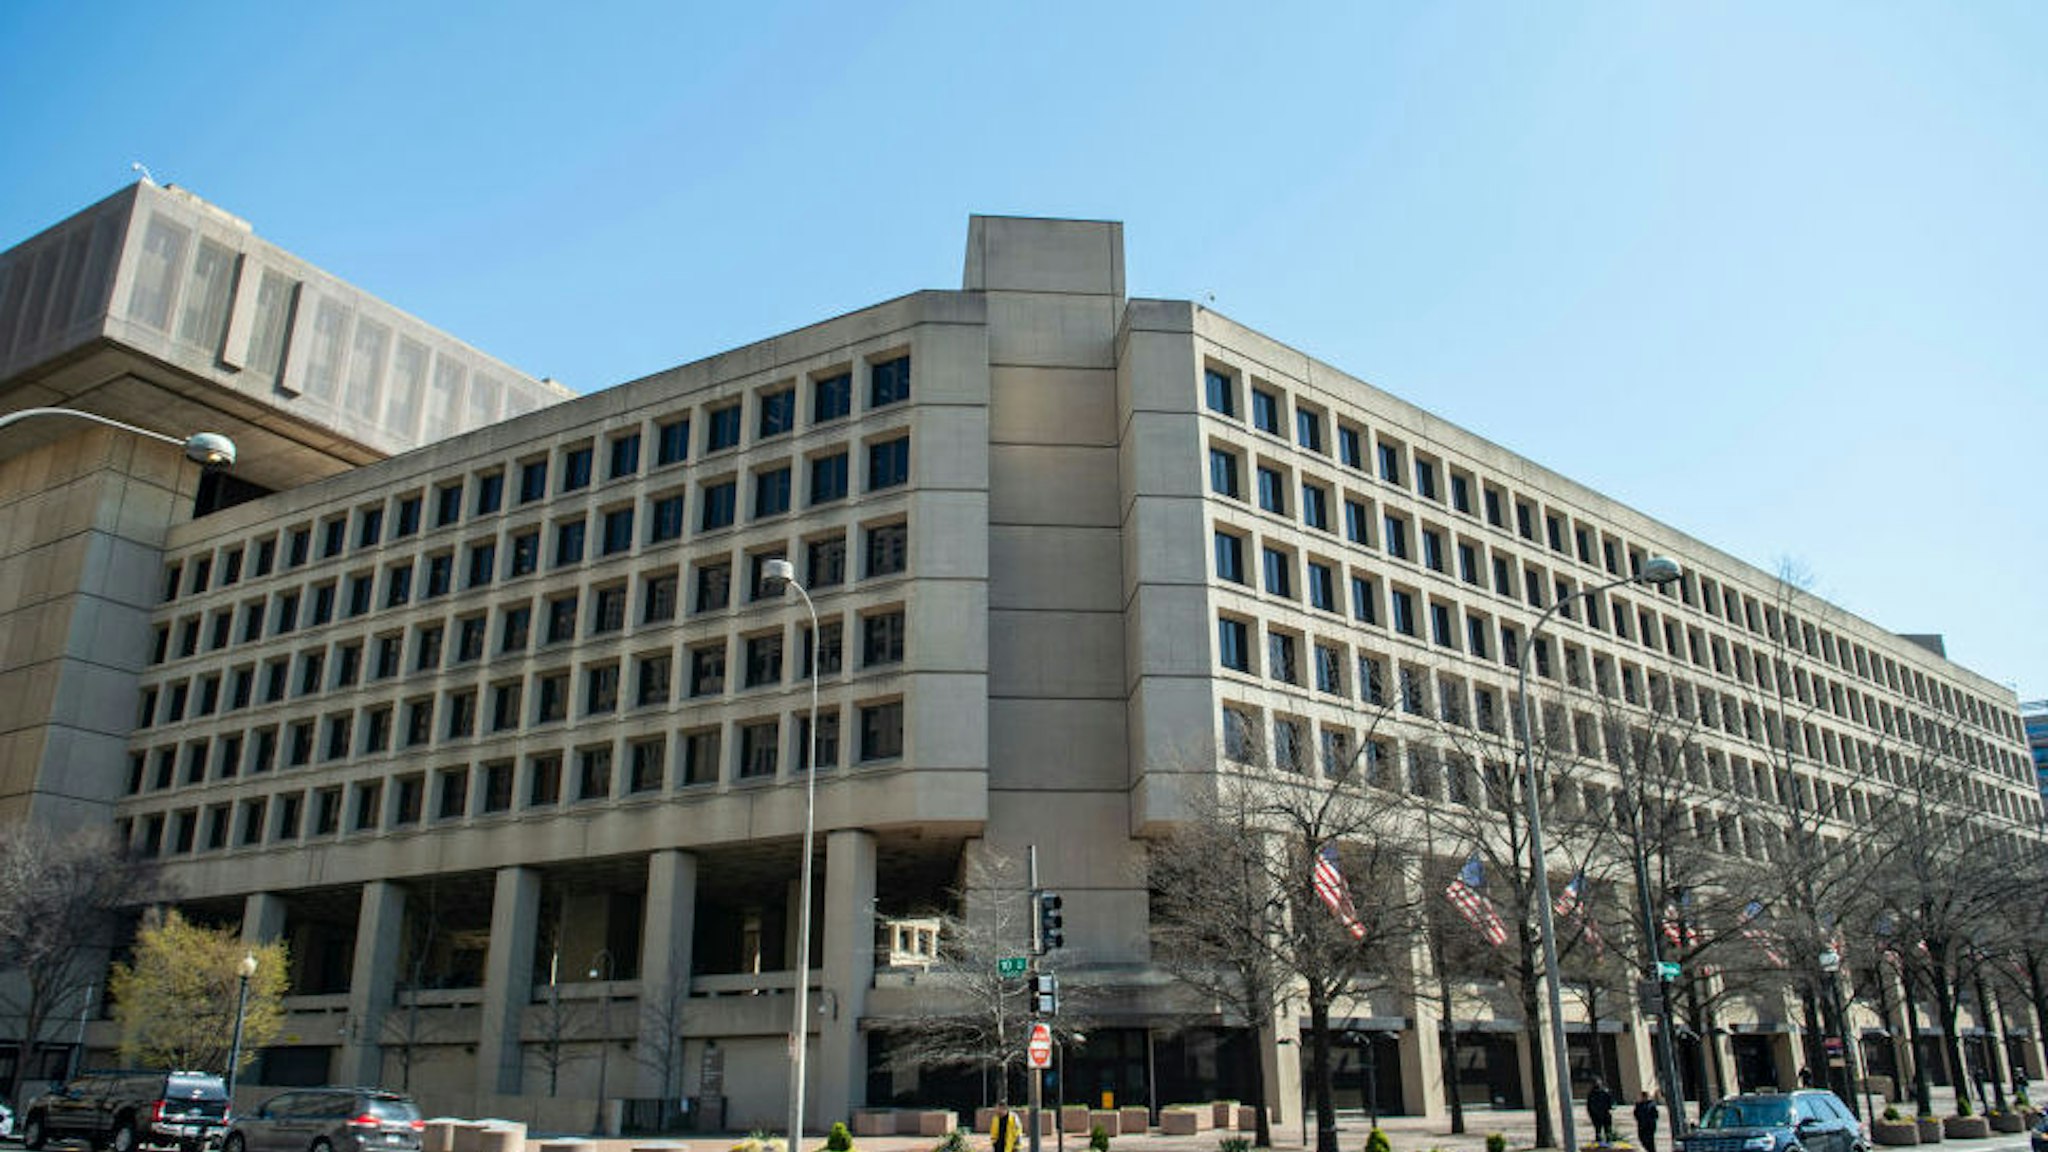 The J. Edgar Hoover Building of the Federal Bureau of Investigation (FBI) is seen on April 03, 2019 in Washington, DC. - The FBI is the domestic intelligence and security service of the United States, and its principal federal law enforcement agency. Operating under the jurisdiction of the United States Department of Justice, the FBI is also a member of the U.S. Intelligence Community and reports to both the Attorney General and the Director of National Intelligence. (Photo by Eric BARADAT / AFP)